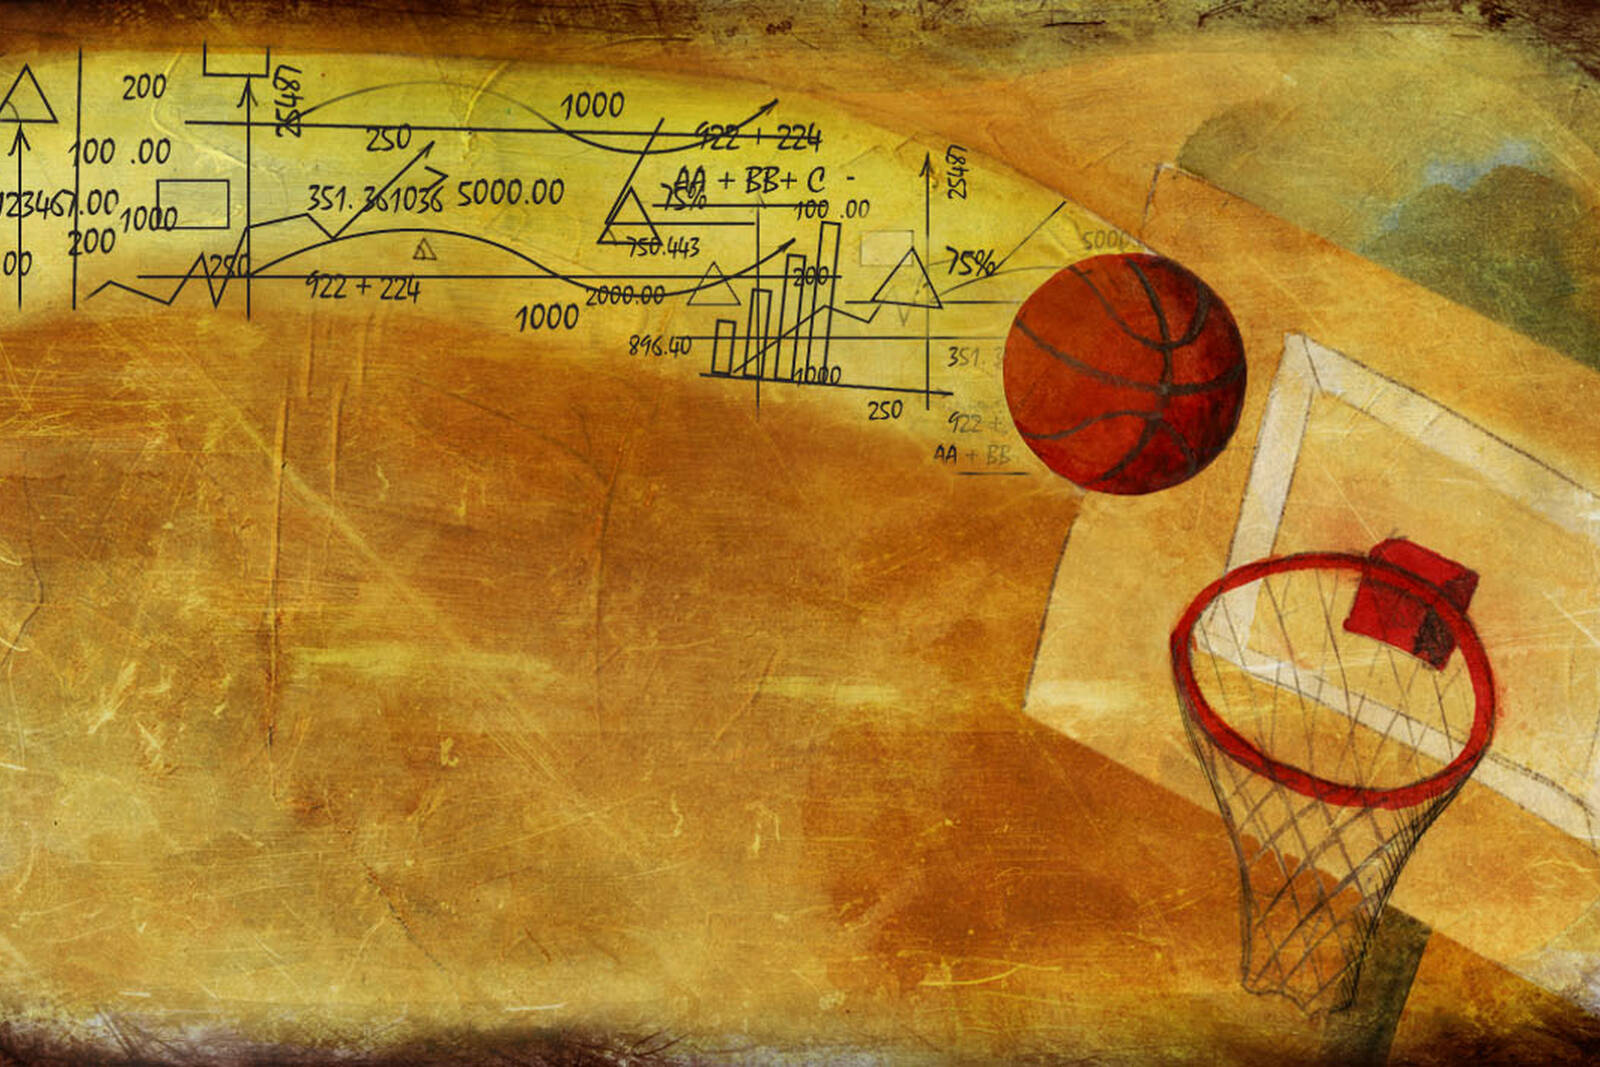 Like in basketball, using data and information around you to call the shots can lead to a big wins.